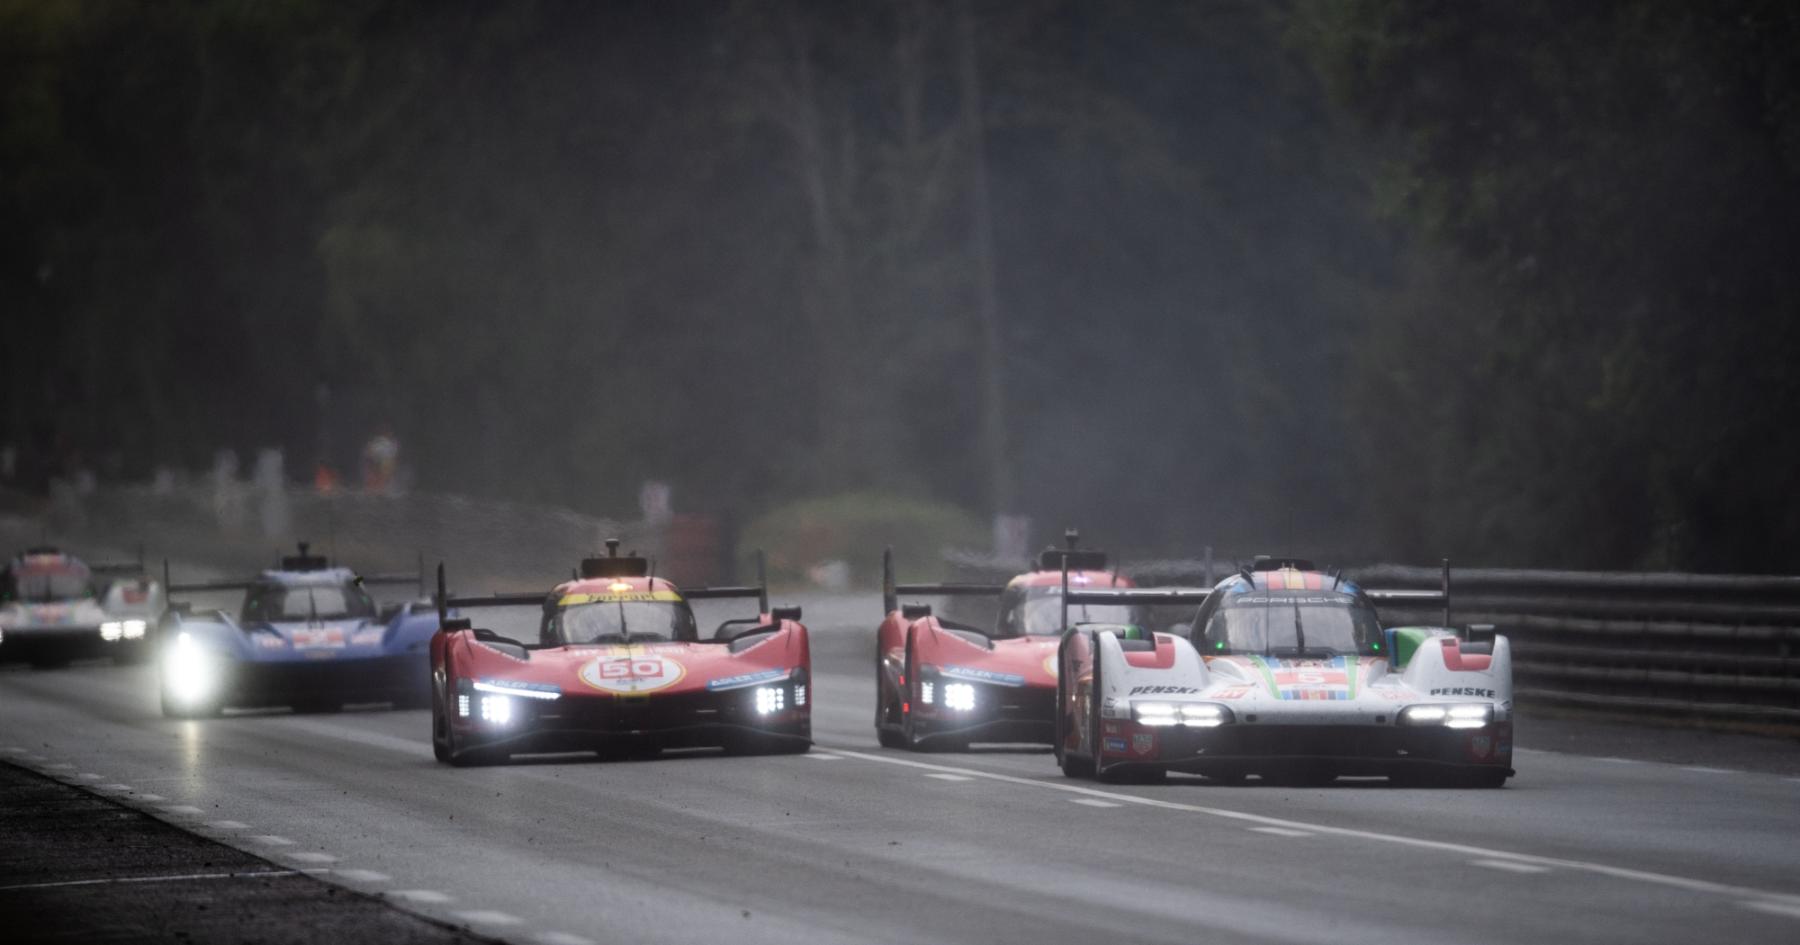 How to watch the 24 Hours of Le Mans live | Overview